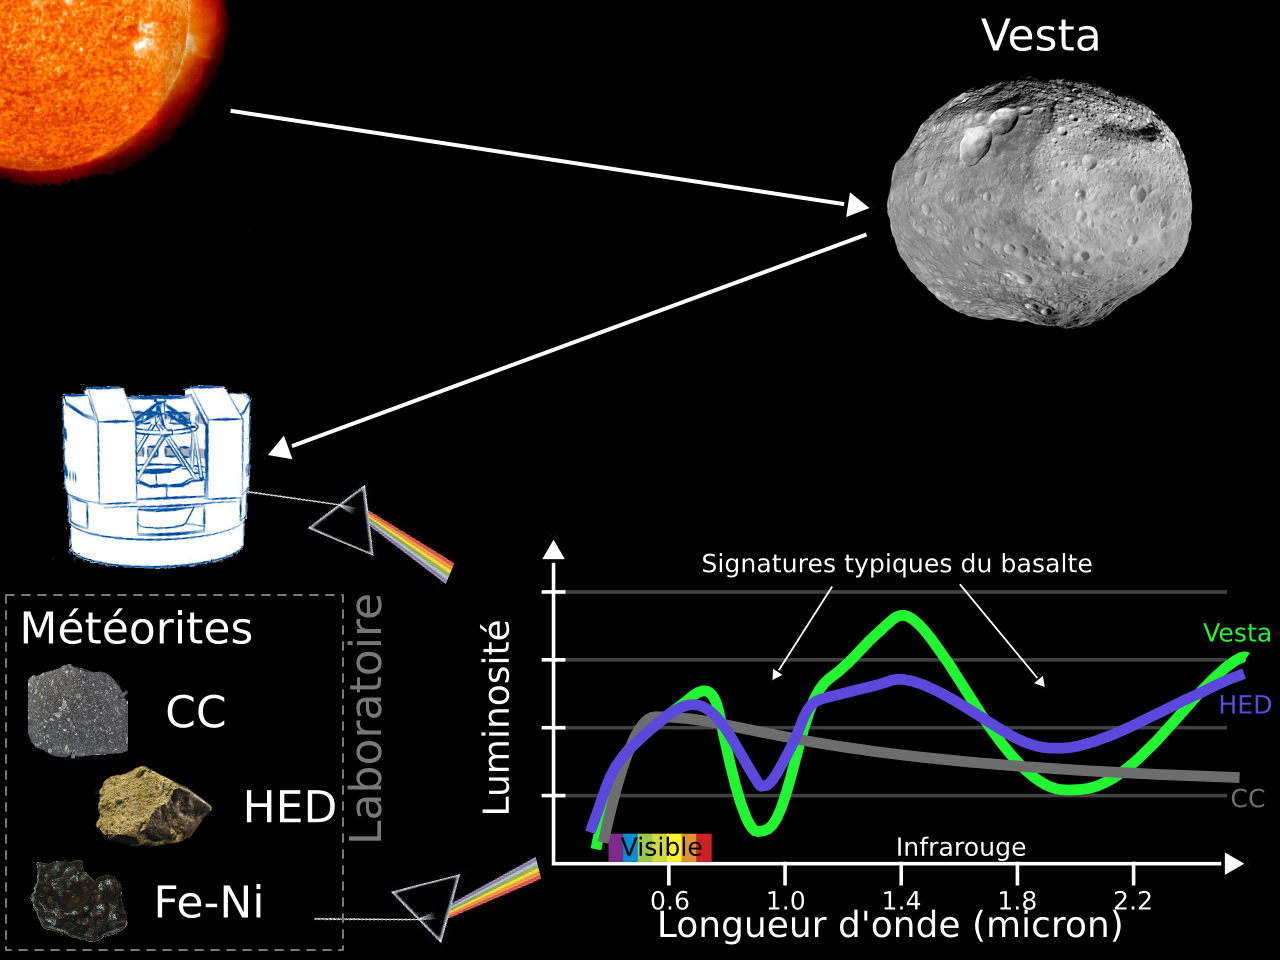 Determination of asteroid composition by spectroscopy.